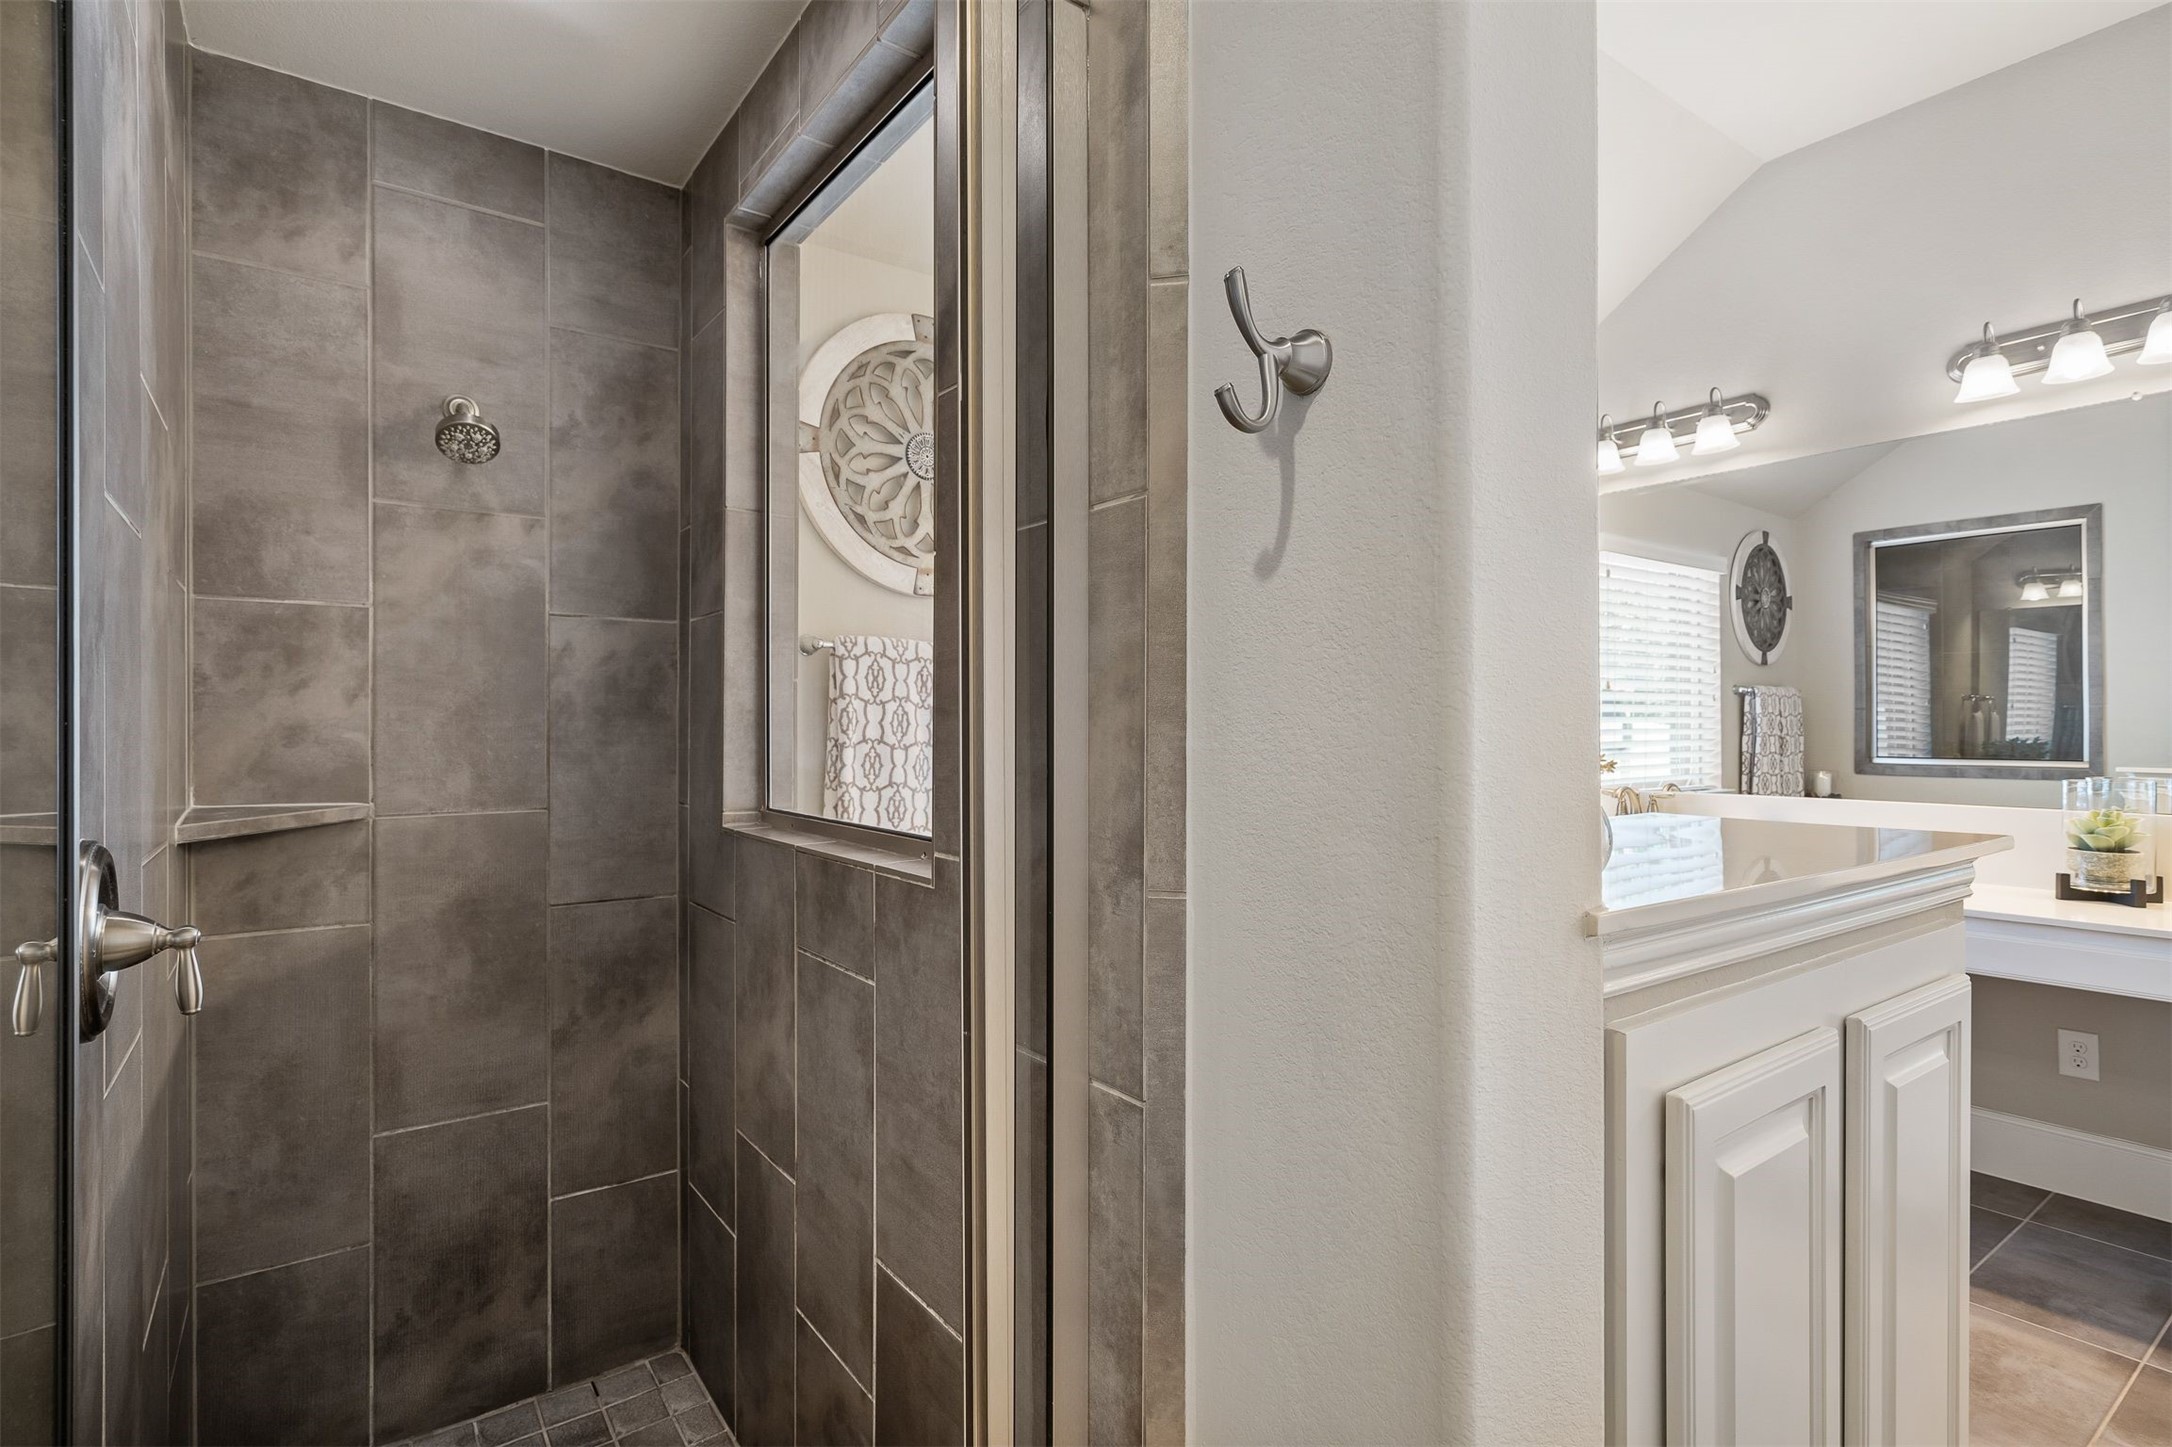 Walk-in shower with glass door and window to let in the natural light!